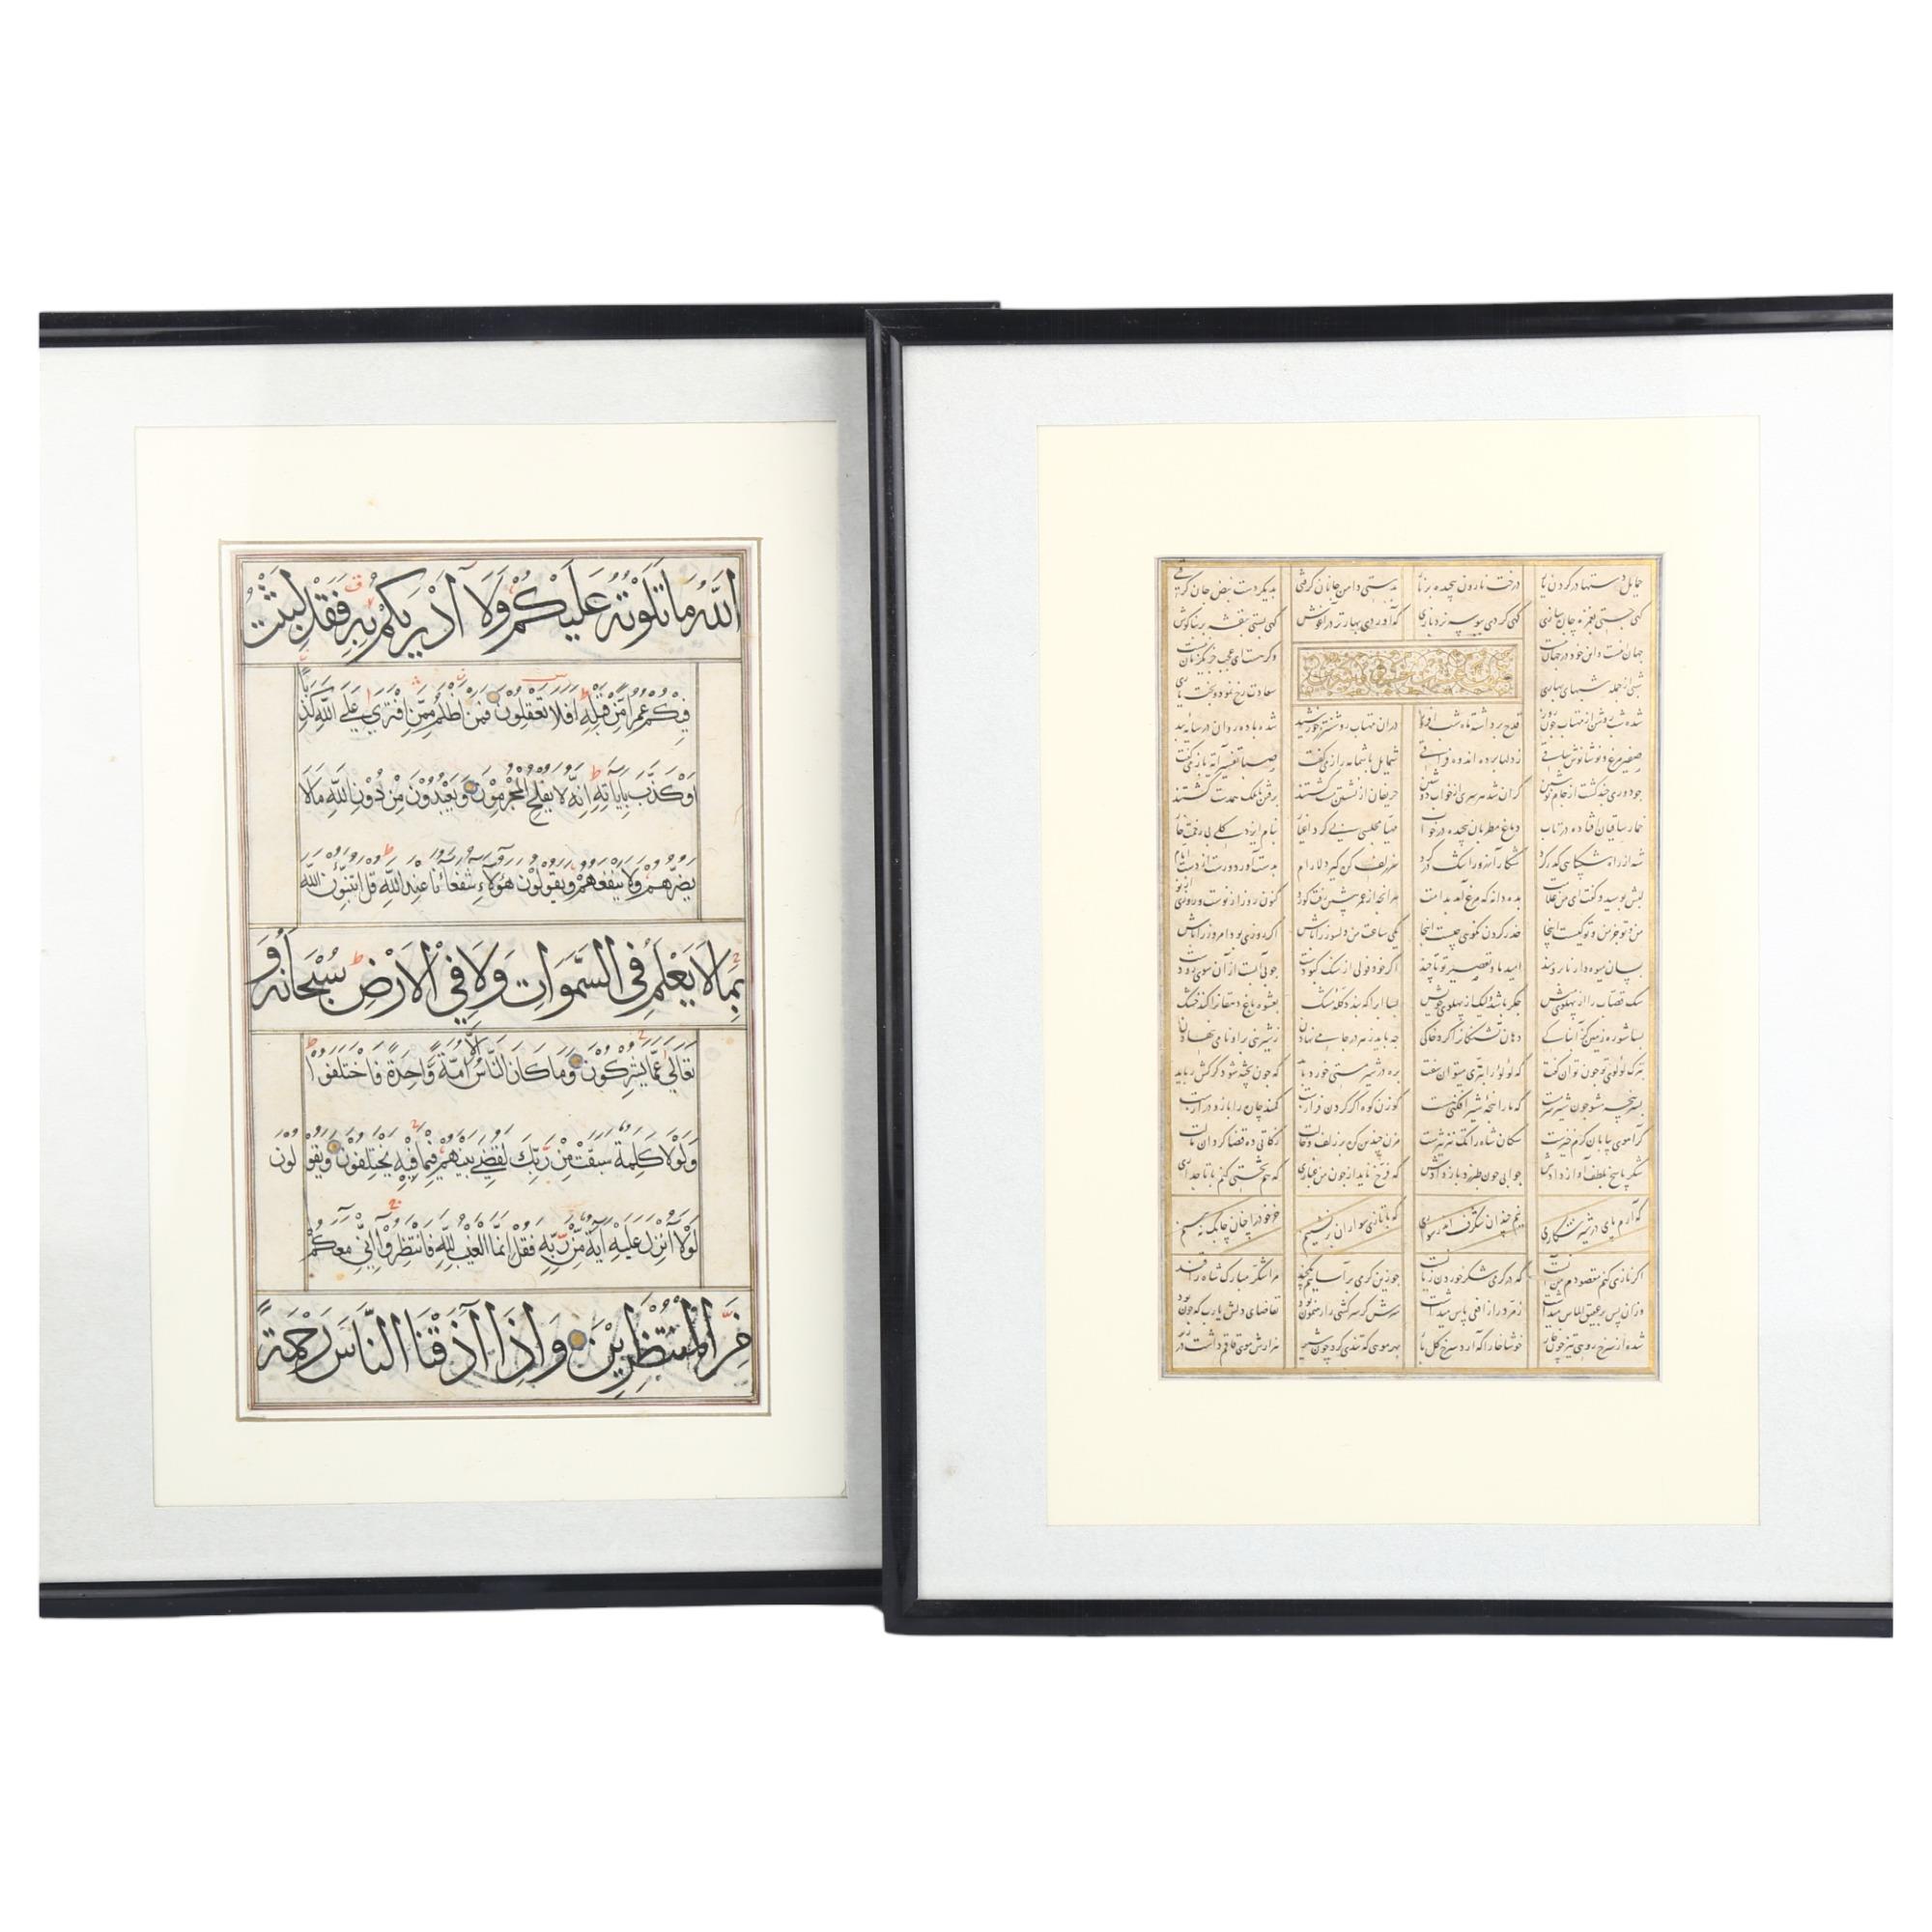 A sheet of handwritten and illuminated text from the Koran, Sultanate India 1616 (the year of